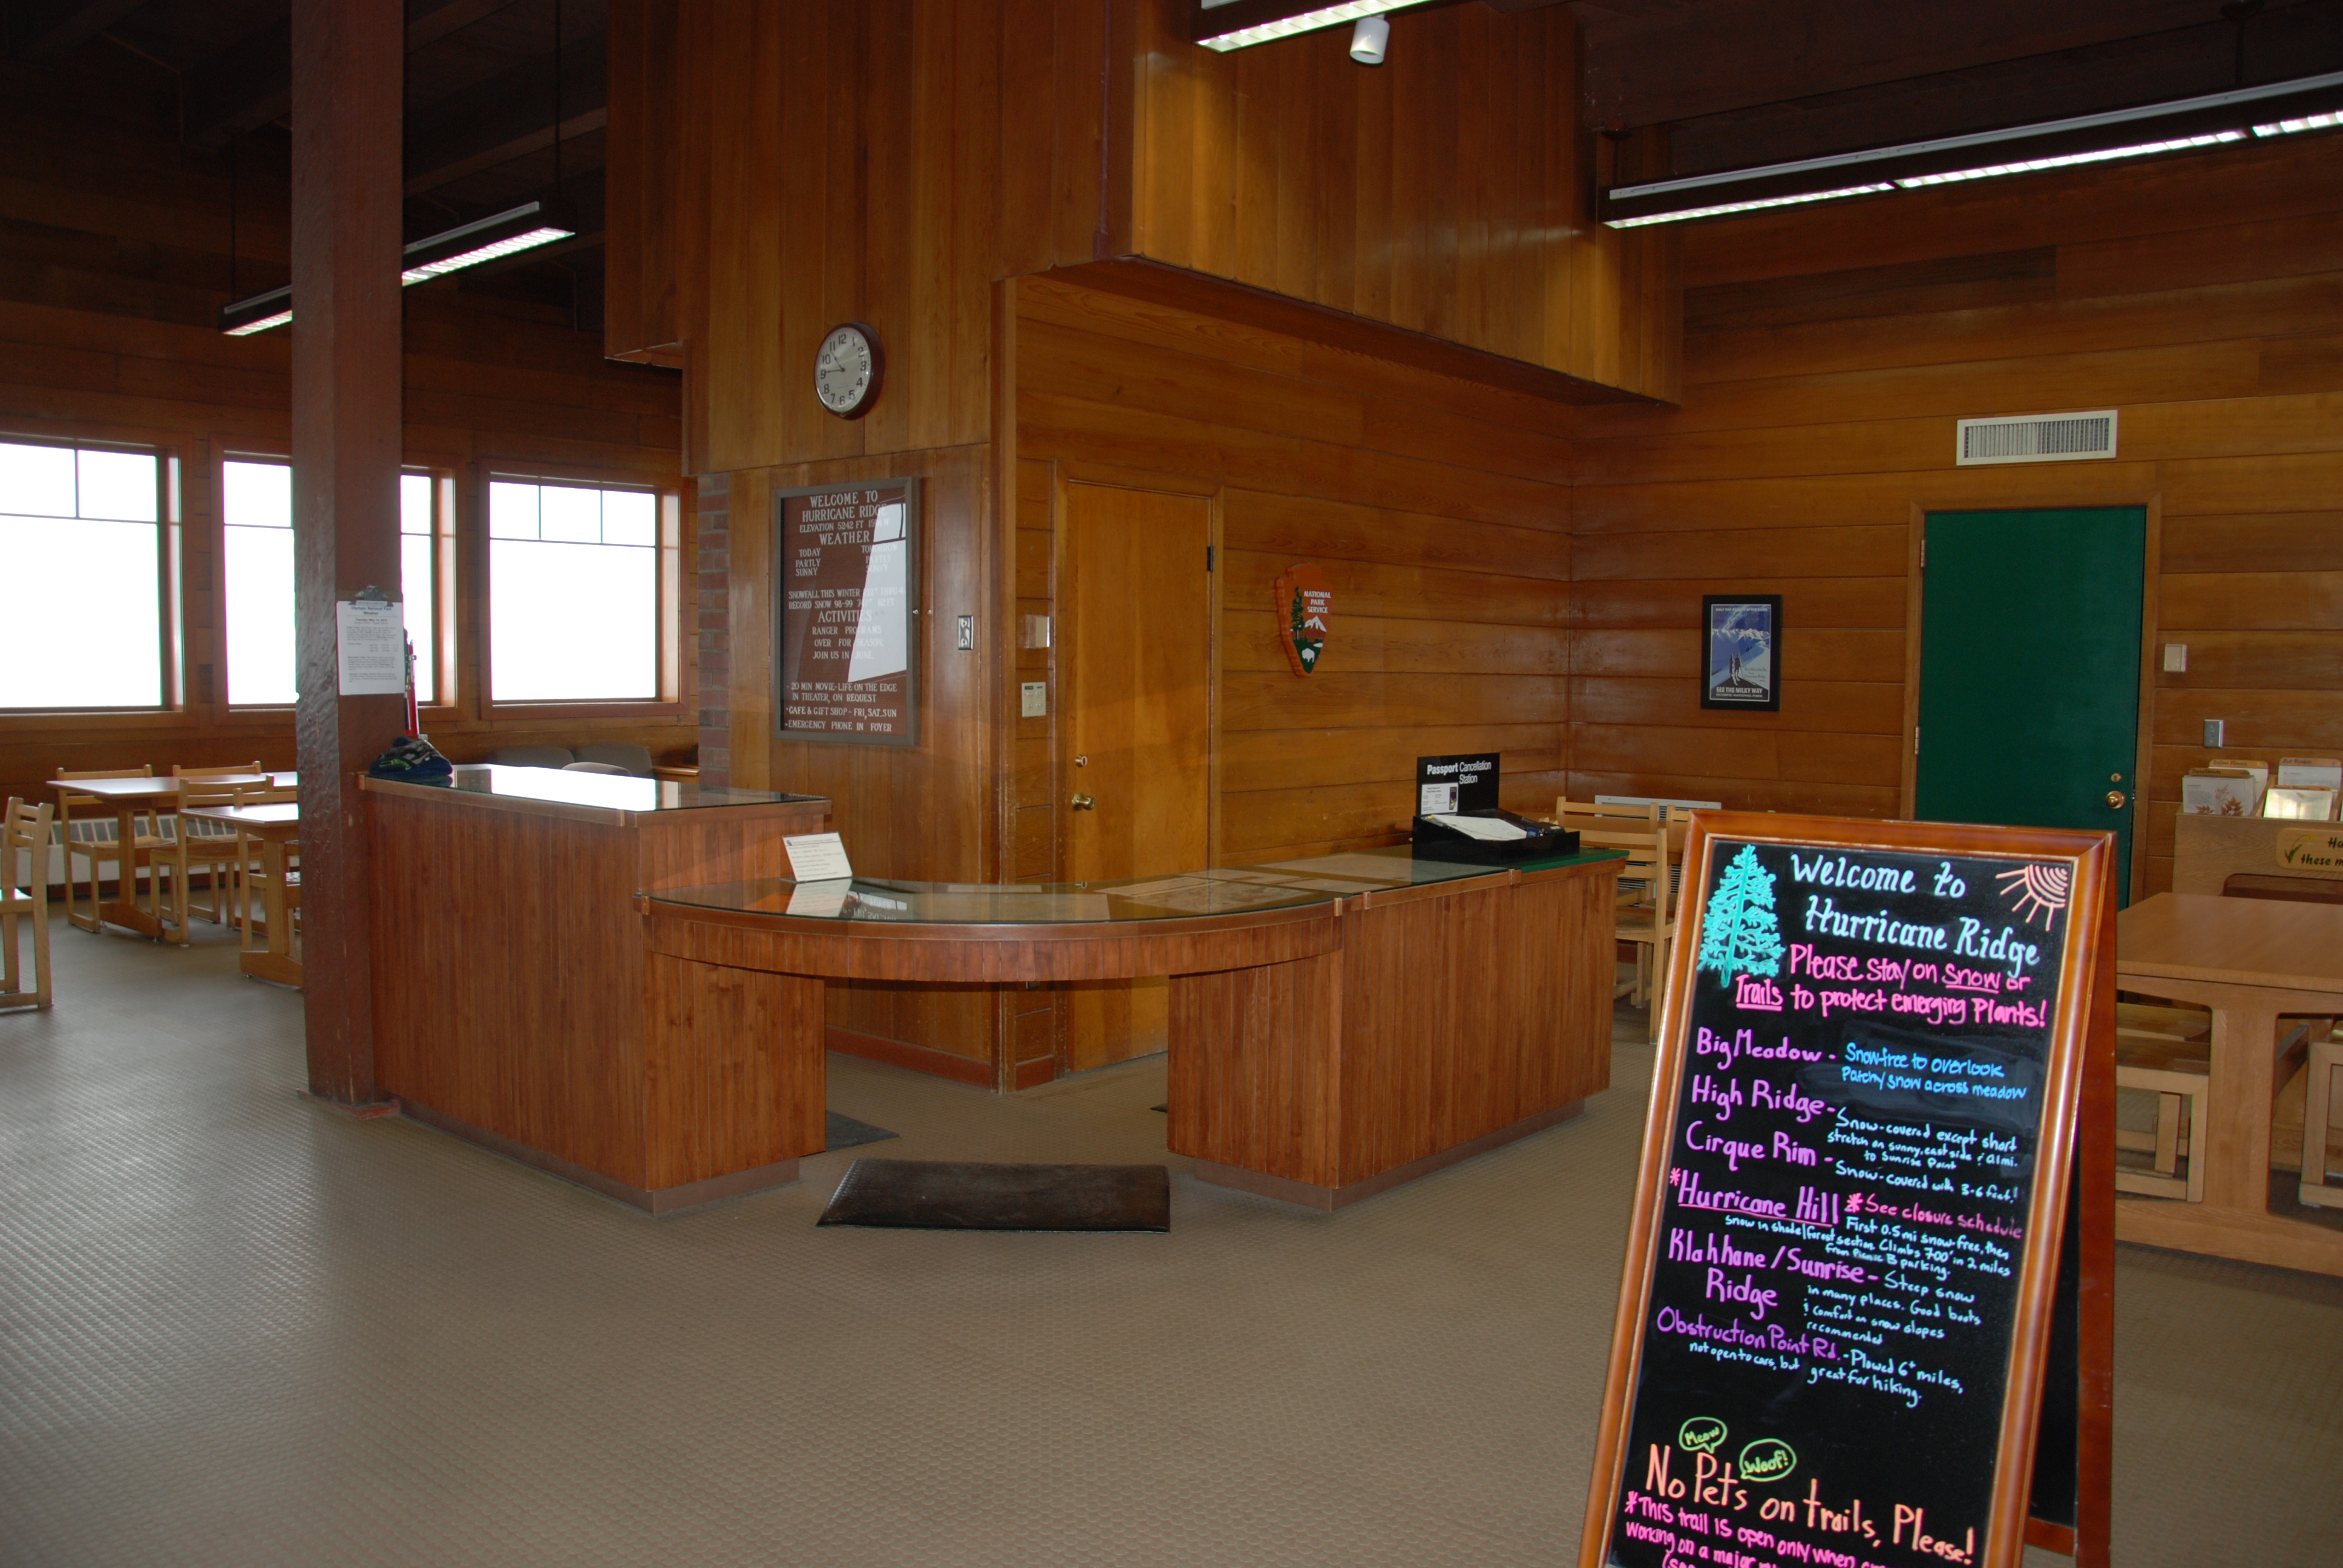 Interior of a wood building, with a wrap-around desk, information boards, windows, chairs and tables.